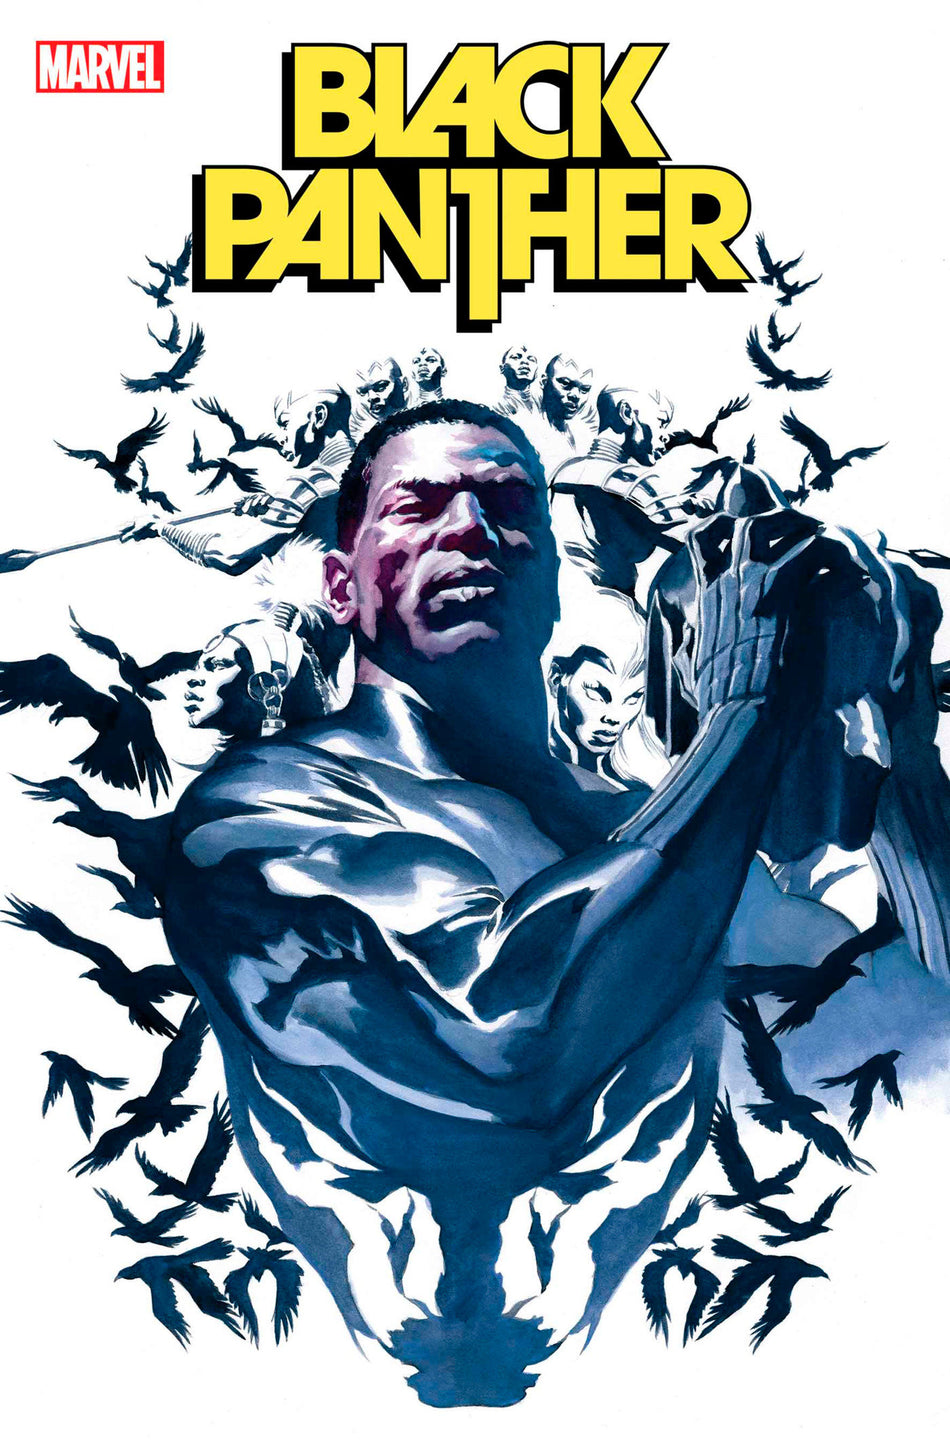 Image of Black Panther 2 comic sold by Stronghold Collectibles.